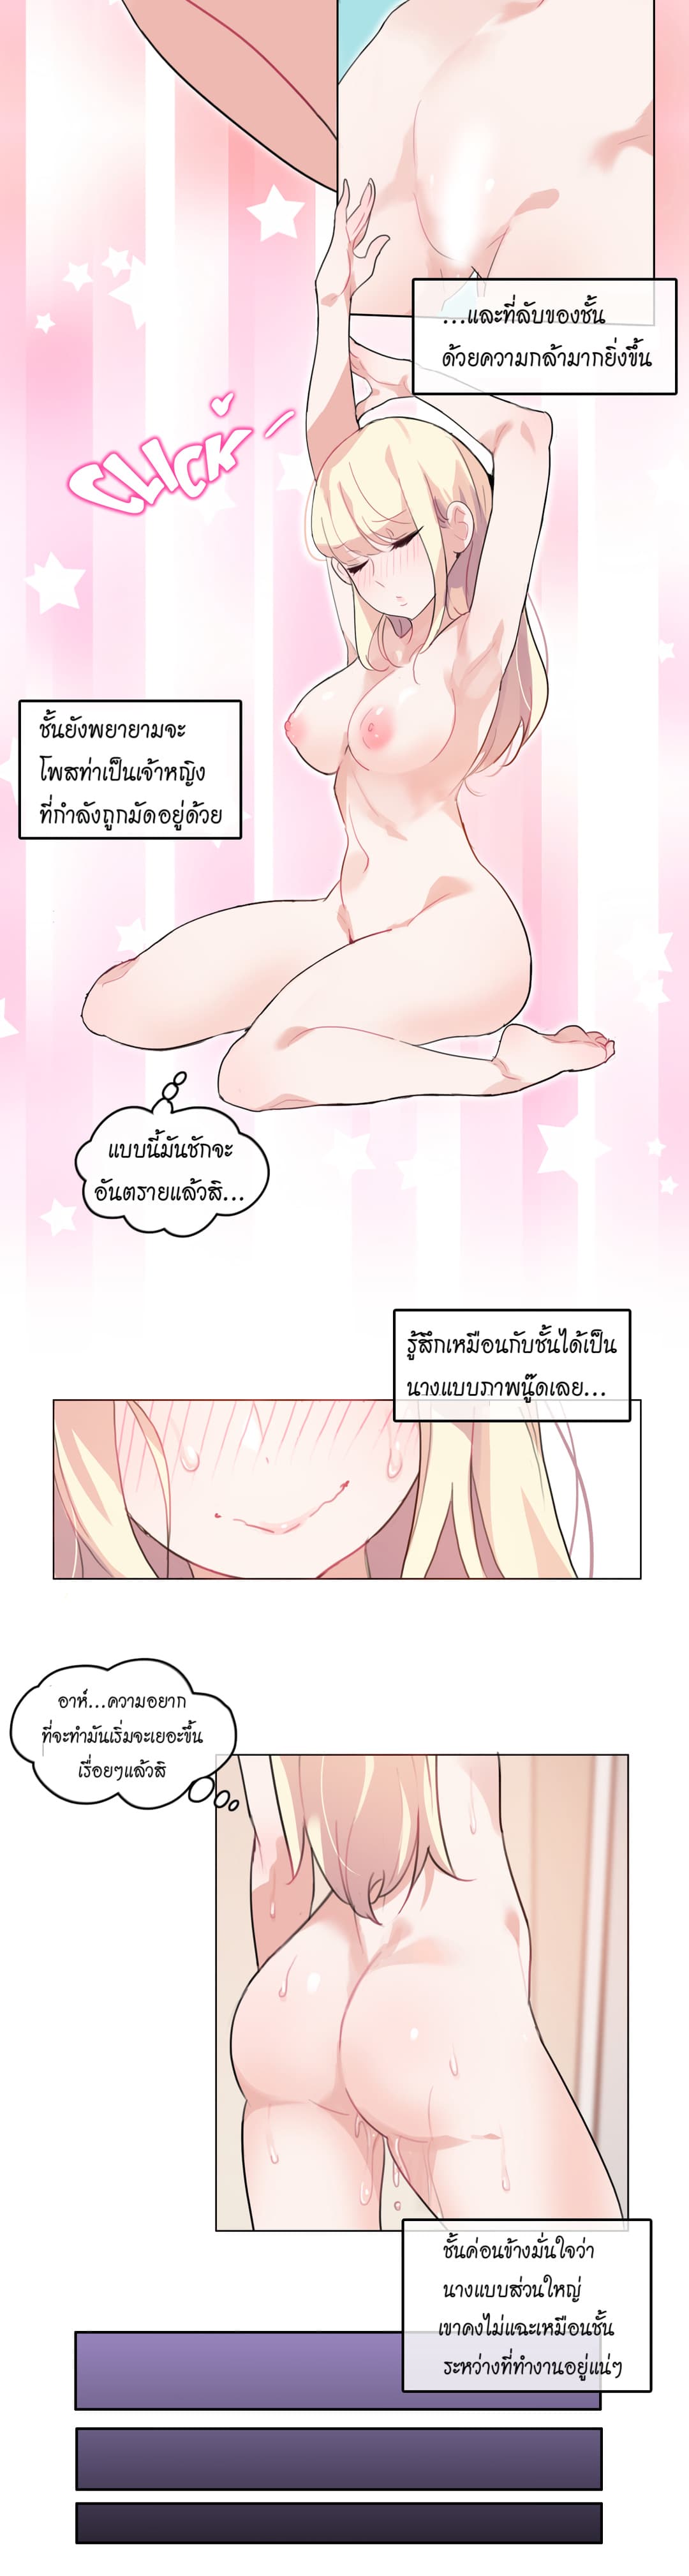 A Pervert’s Daily Life 7 (5)